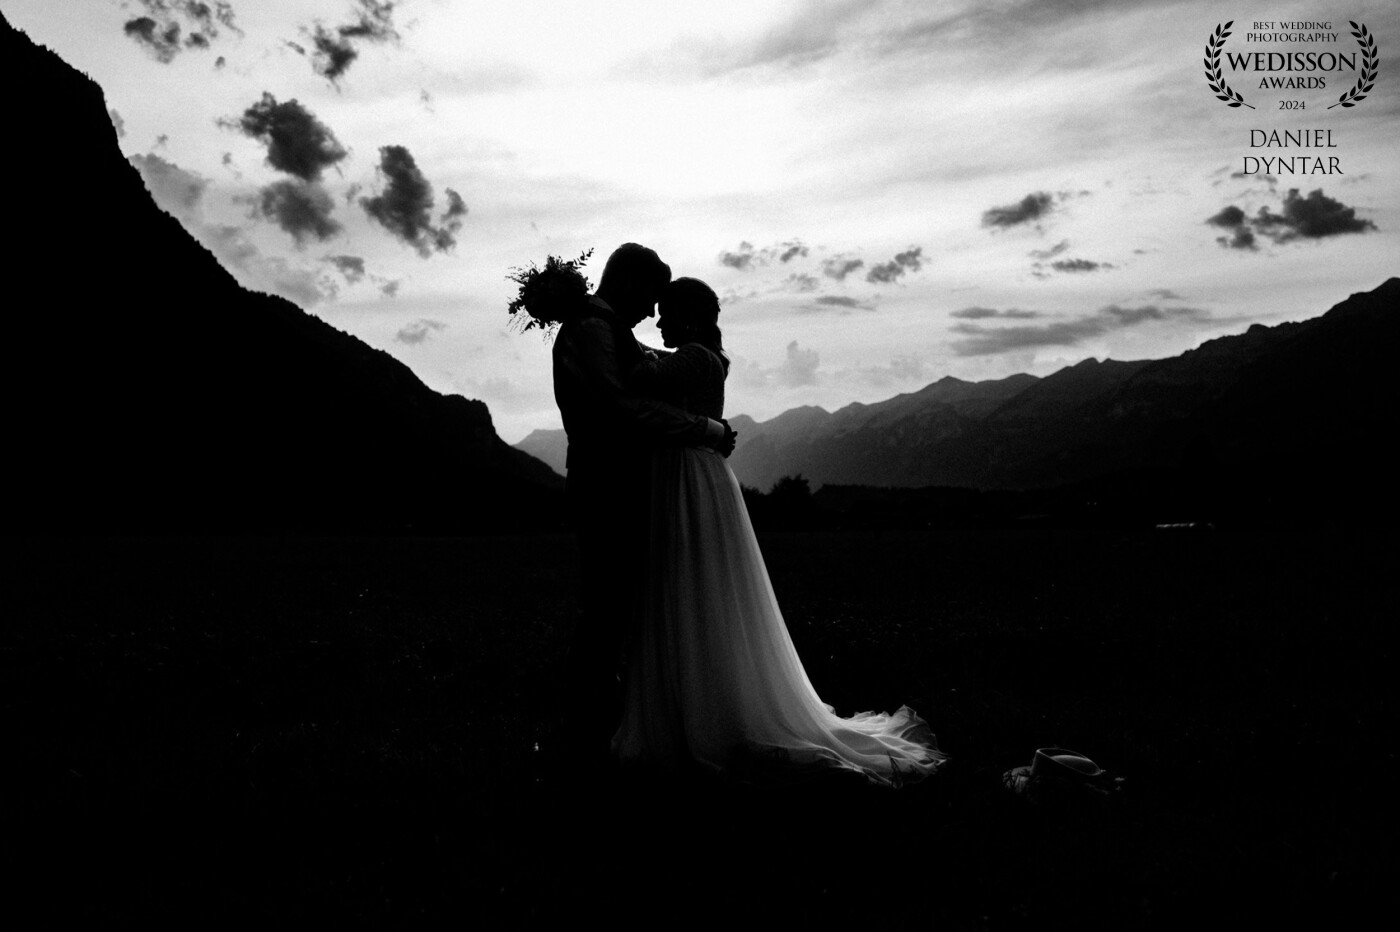 One of my favorite weddings. It was in Meiringen near the army airport. I love to have mountains in the background. This photo was taken after sunset and i love it. Awesome couple beautiful cloudy sky and mountains.